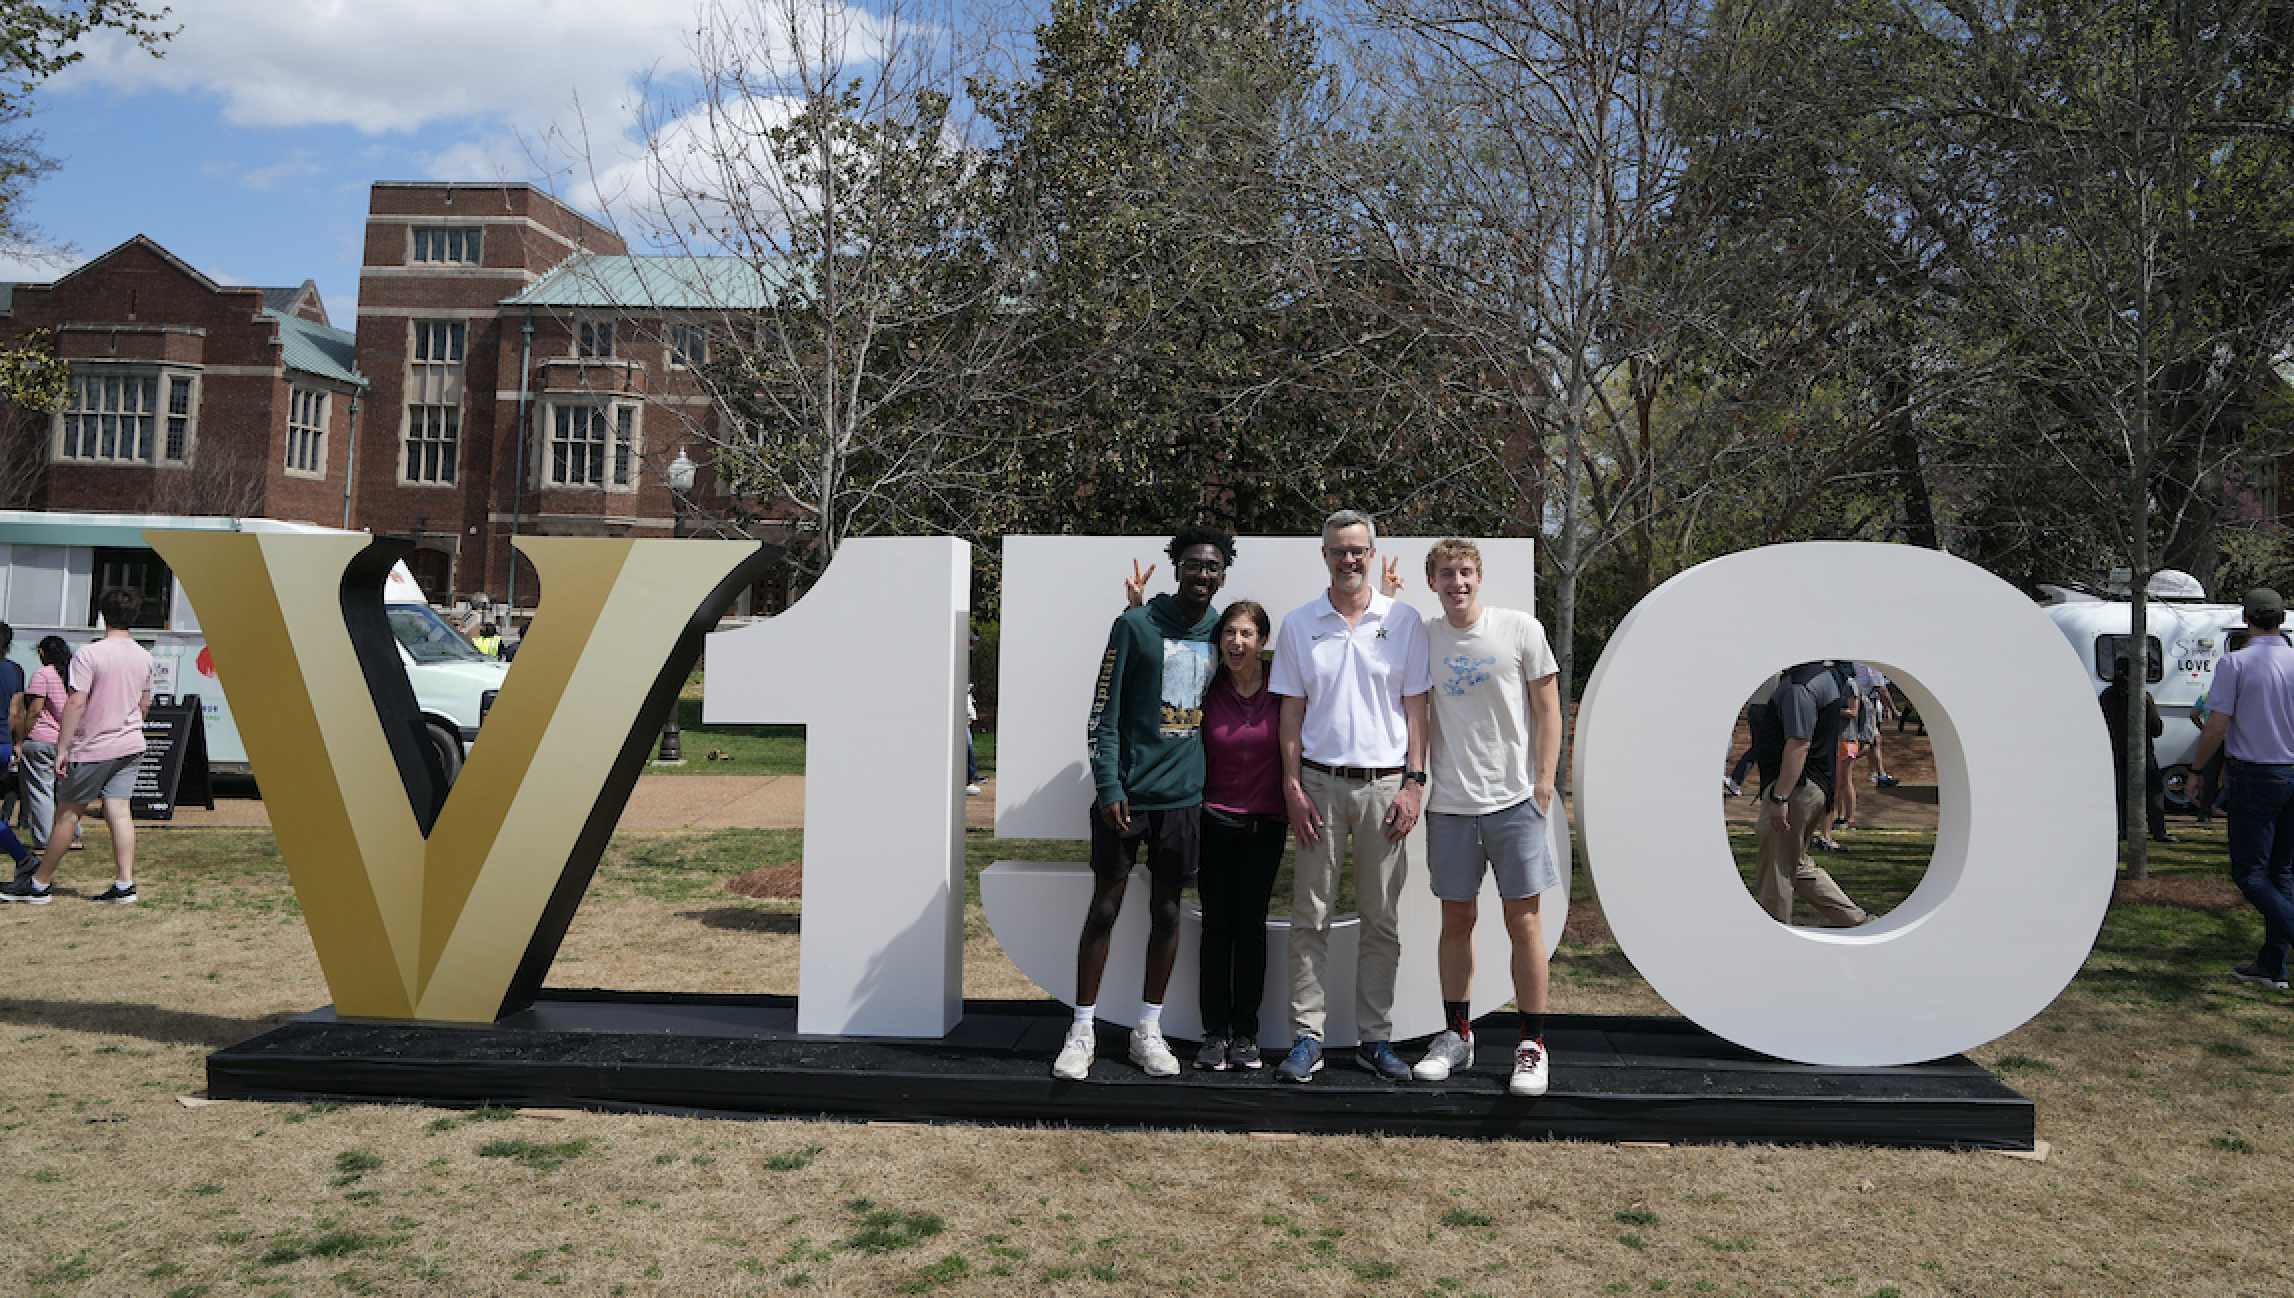 Vanderbilt community members pose with the V150 sign at the Sesquicentennial kickoff celebration on Alumni Lawn. (Joe Howell)